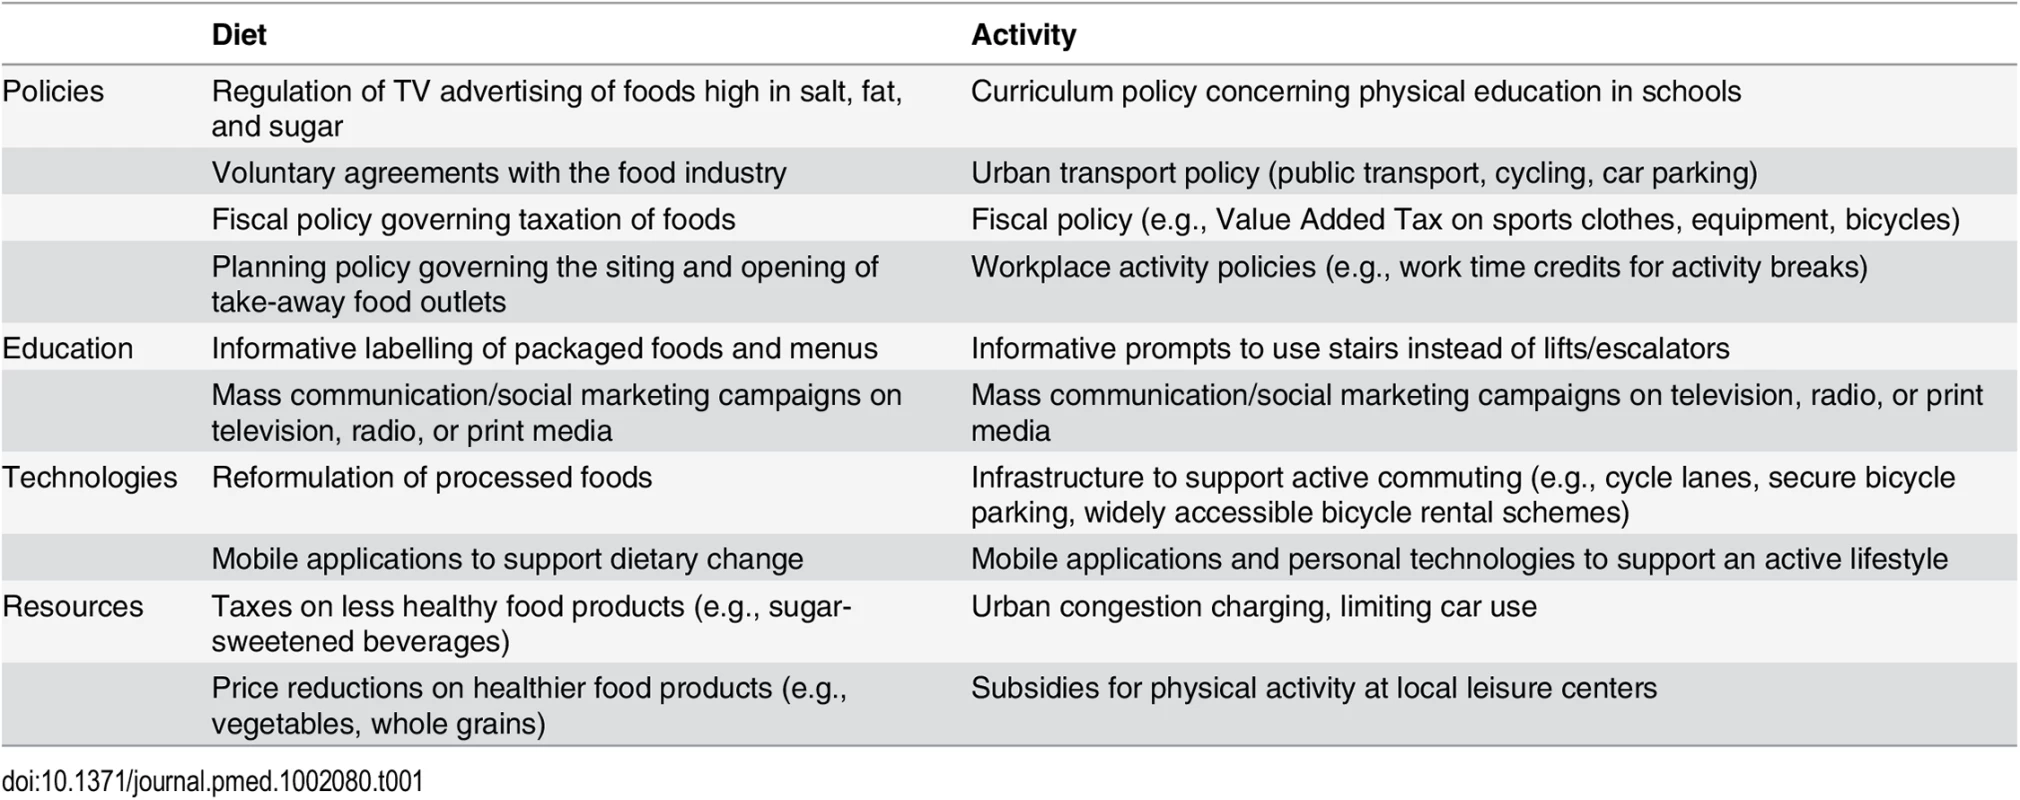 Potential examples of population level interventions to change diet and physical activity behaviors, by principal modality.